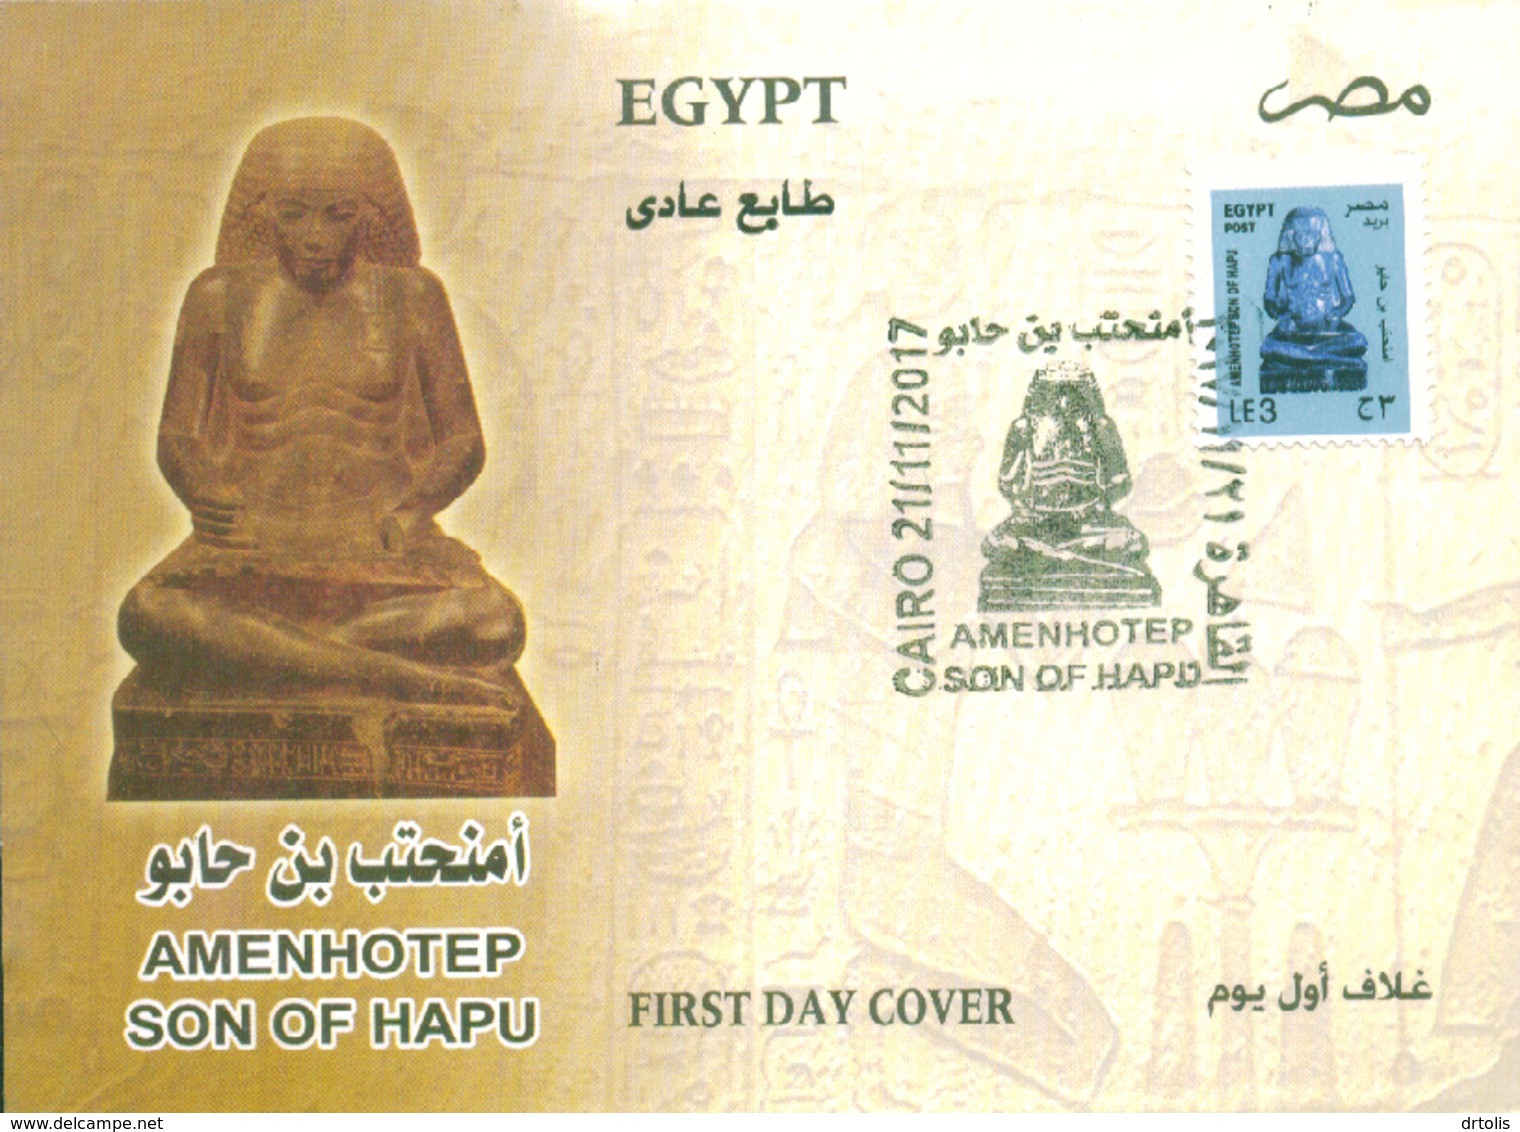 EGYPT / 2015 - 2017 / THUTMOSE III / AMENHOTEP ; SON OF HAPU / 2 FDCS WITH DIFFERENT DATES OF ISSUE ???? - Brieven En Documenten